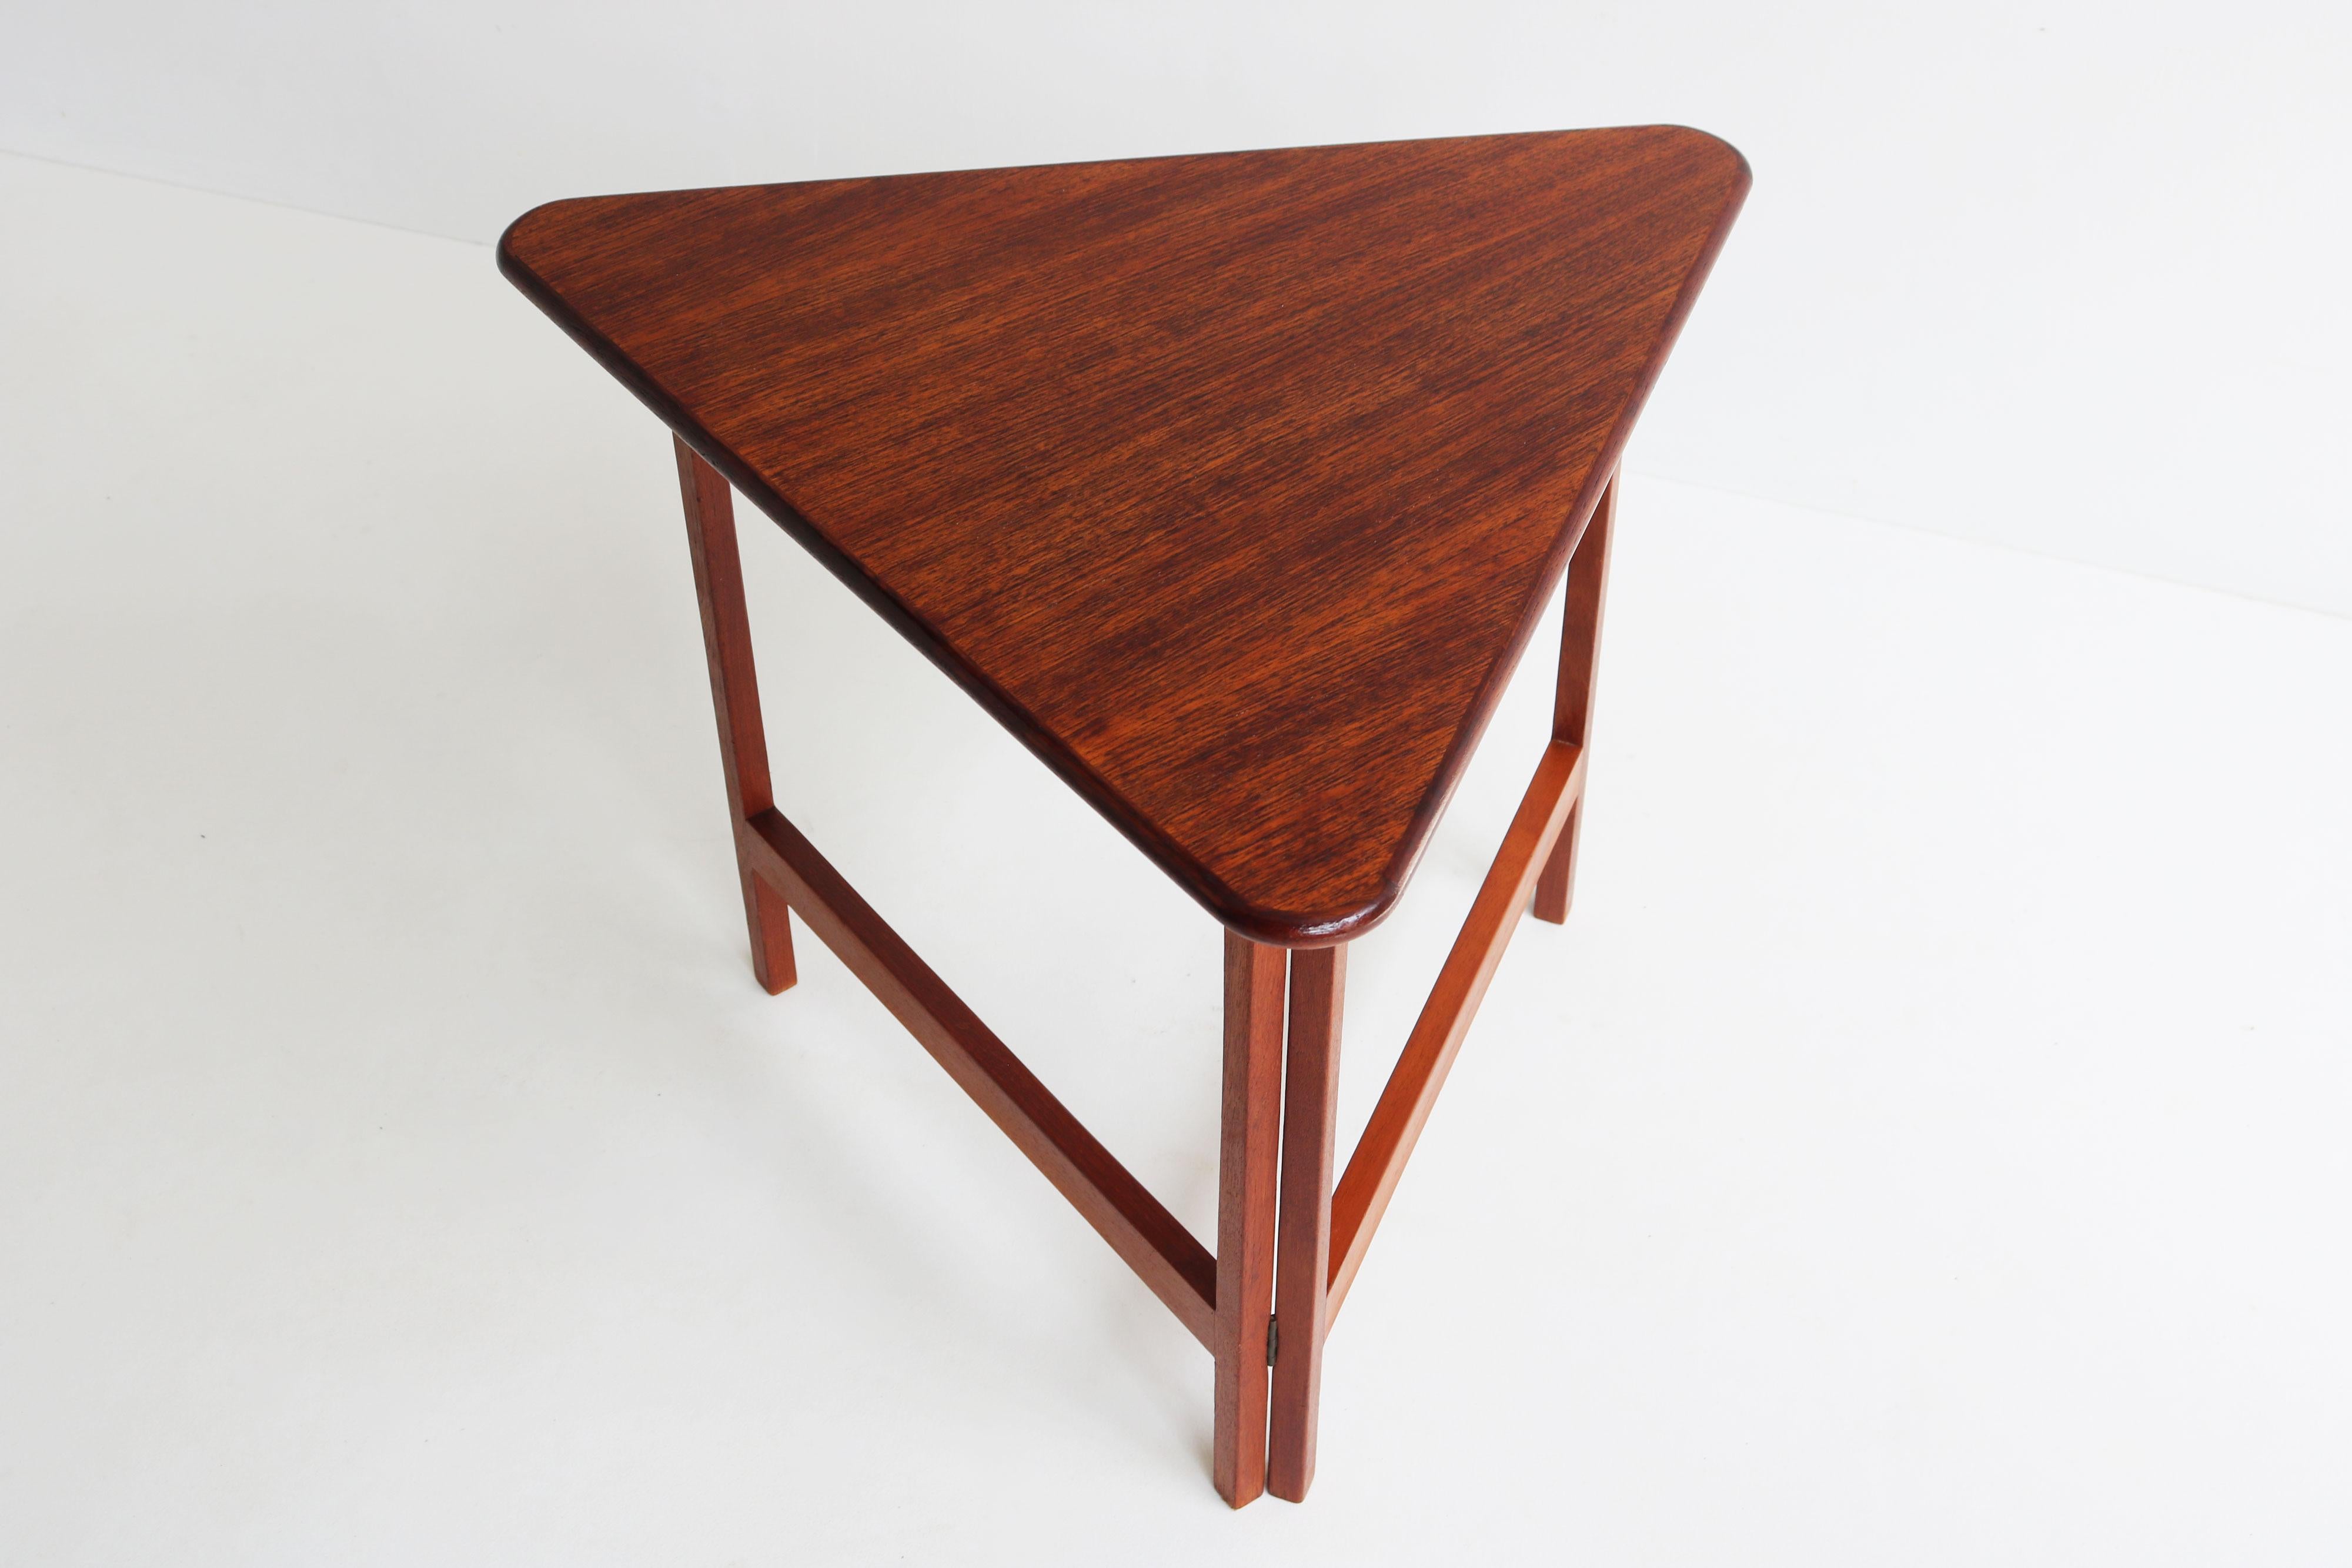 Rare & Unique! This Mid-century modern Danish design foldable triangular table by Illum Wikkelso for Silkeborg, Denmark circa 1960. 
Crafted from teak with attention to detail & a unique design that stands out. 
Folds with ease and pops into sturdy